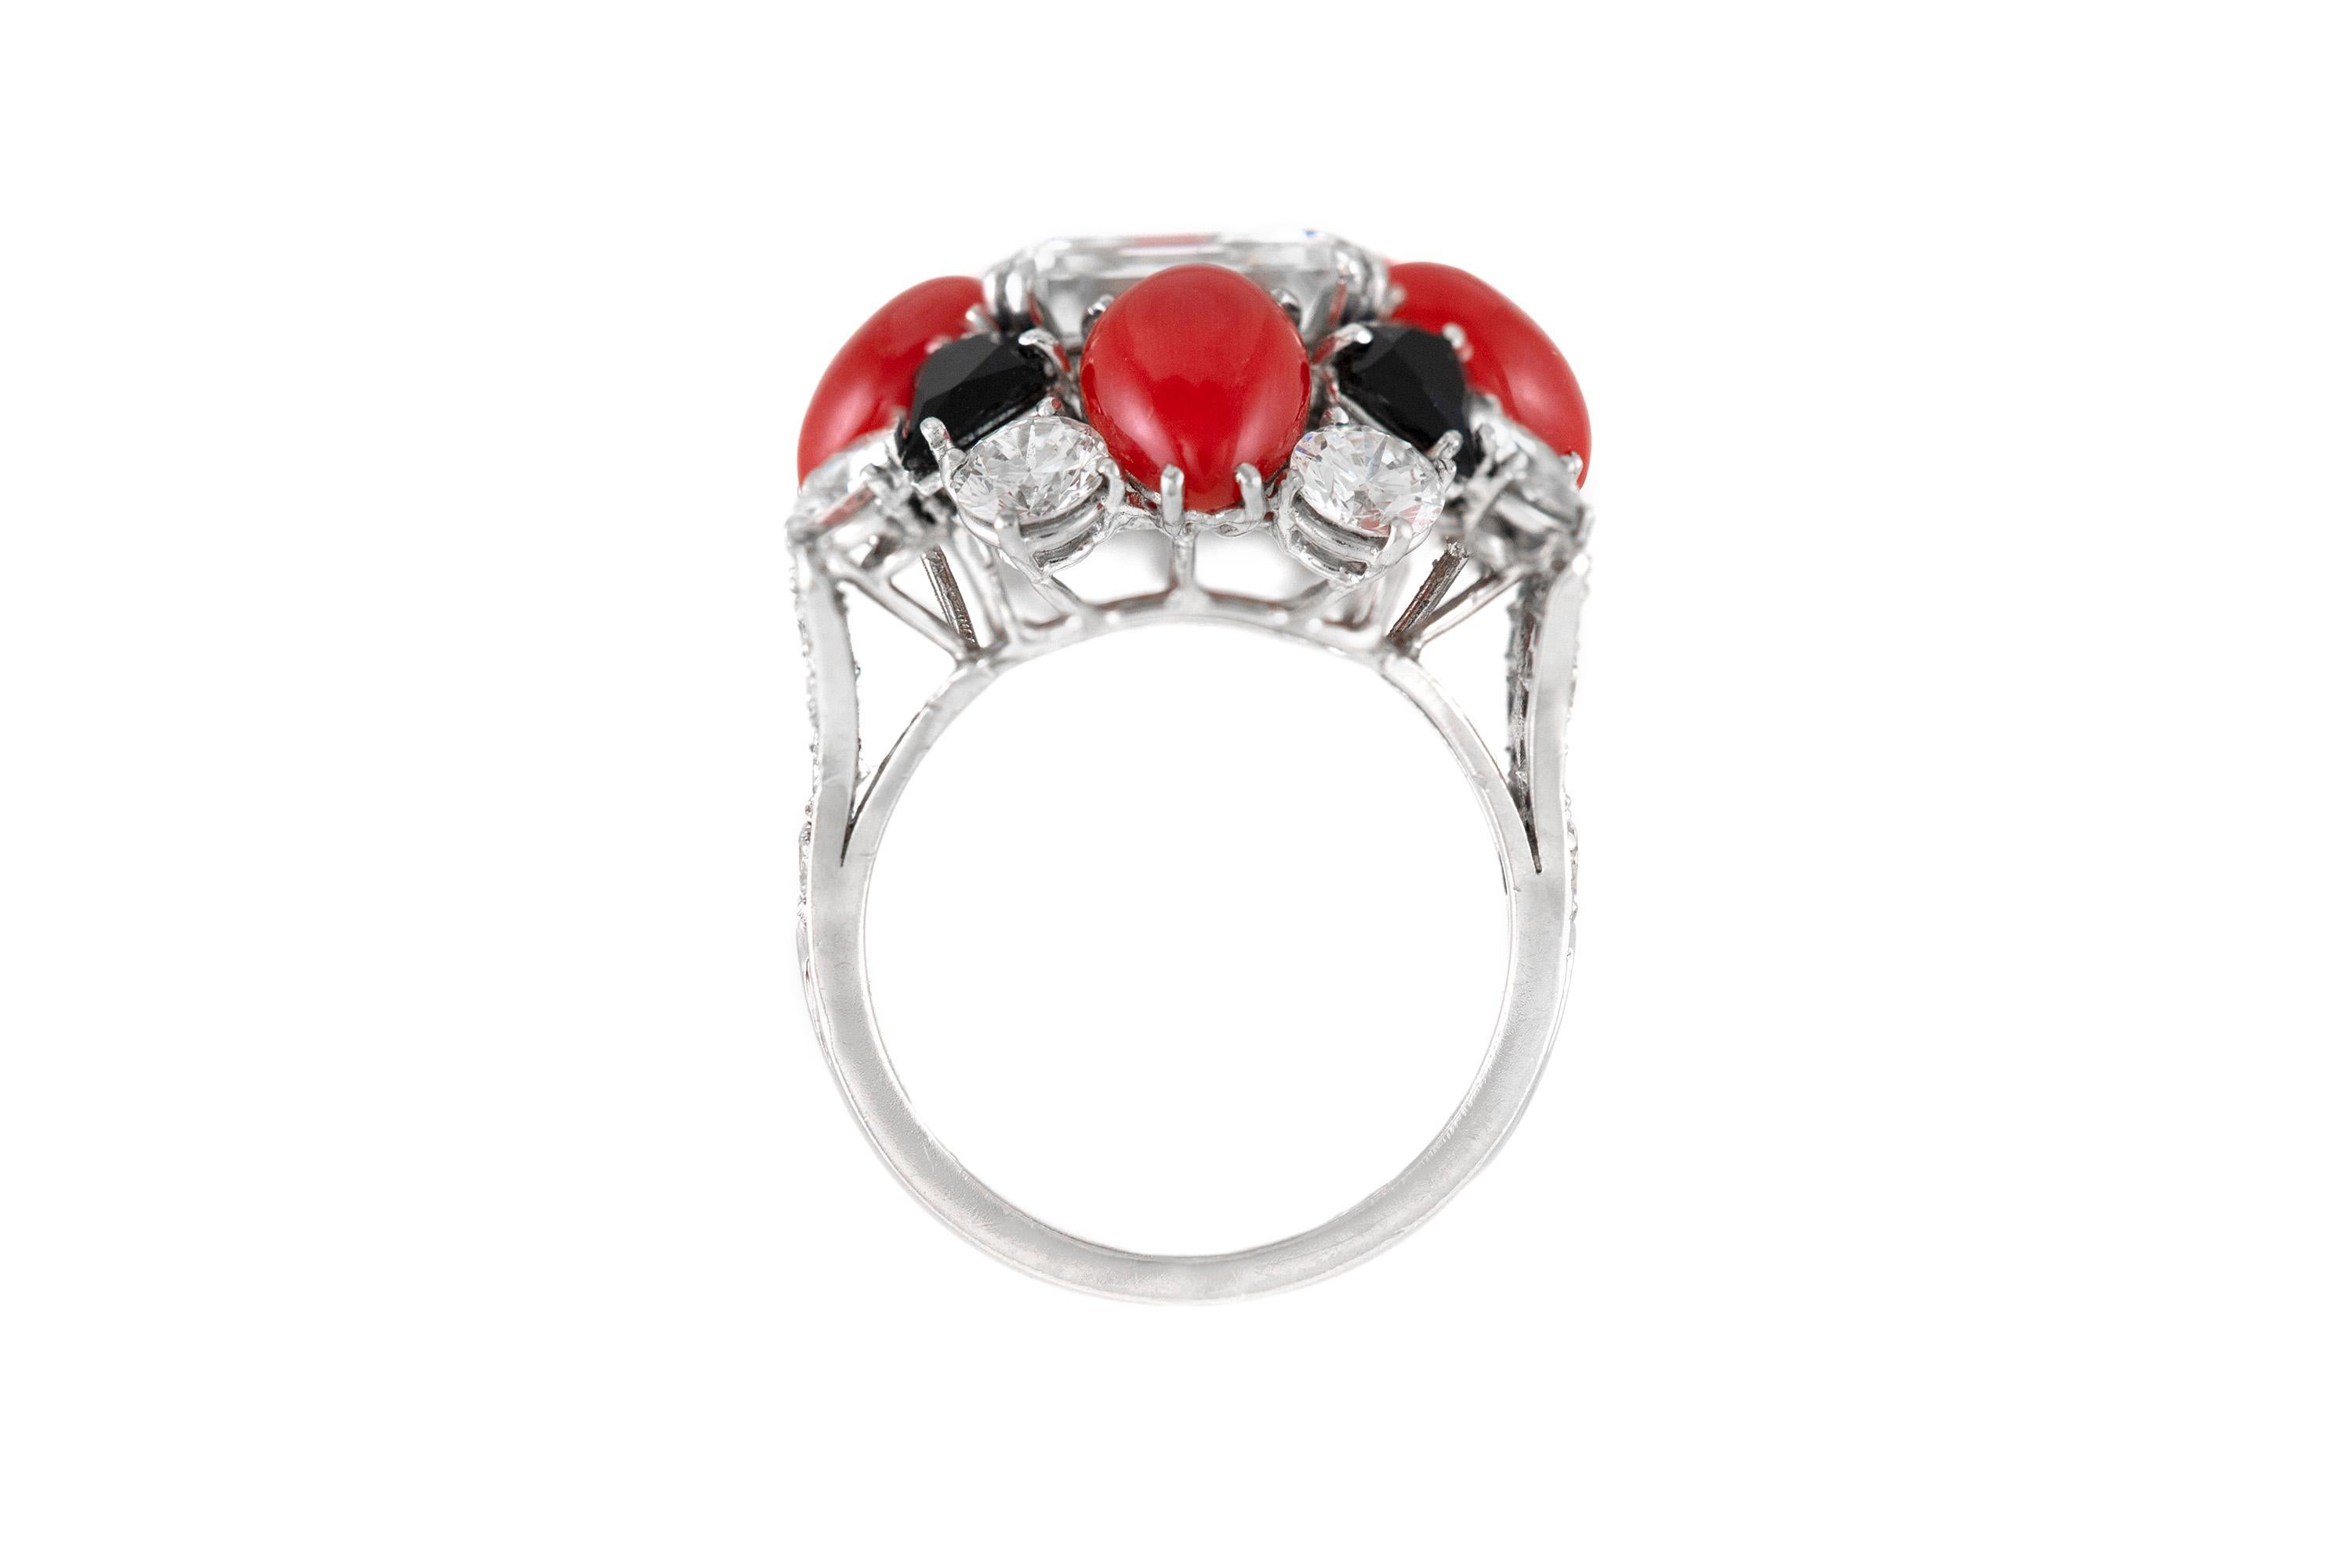 Women's or Men's 1970s Ruser Ring with Center GIA Emerald Cut Diamond, Coral and Onyx